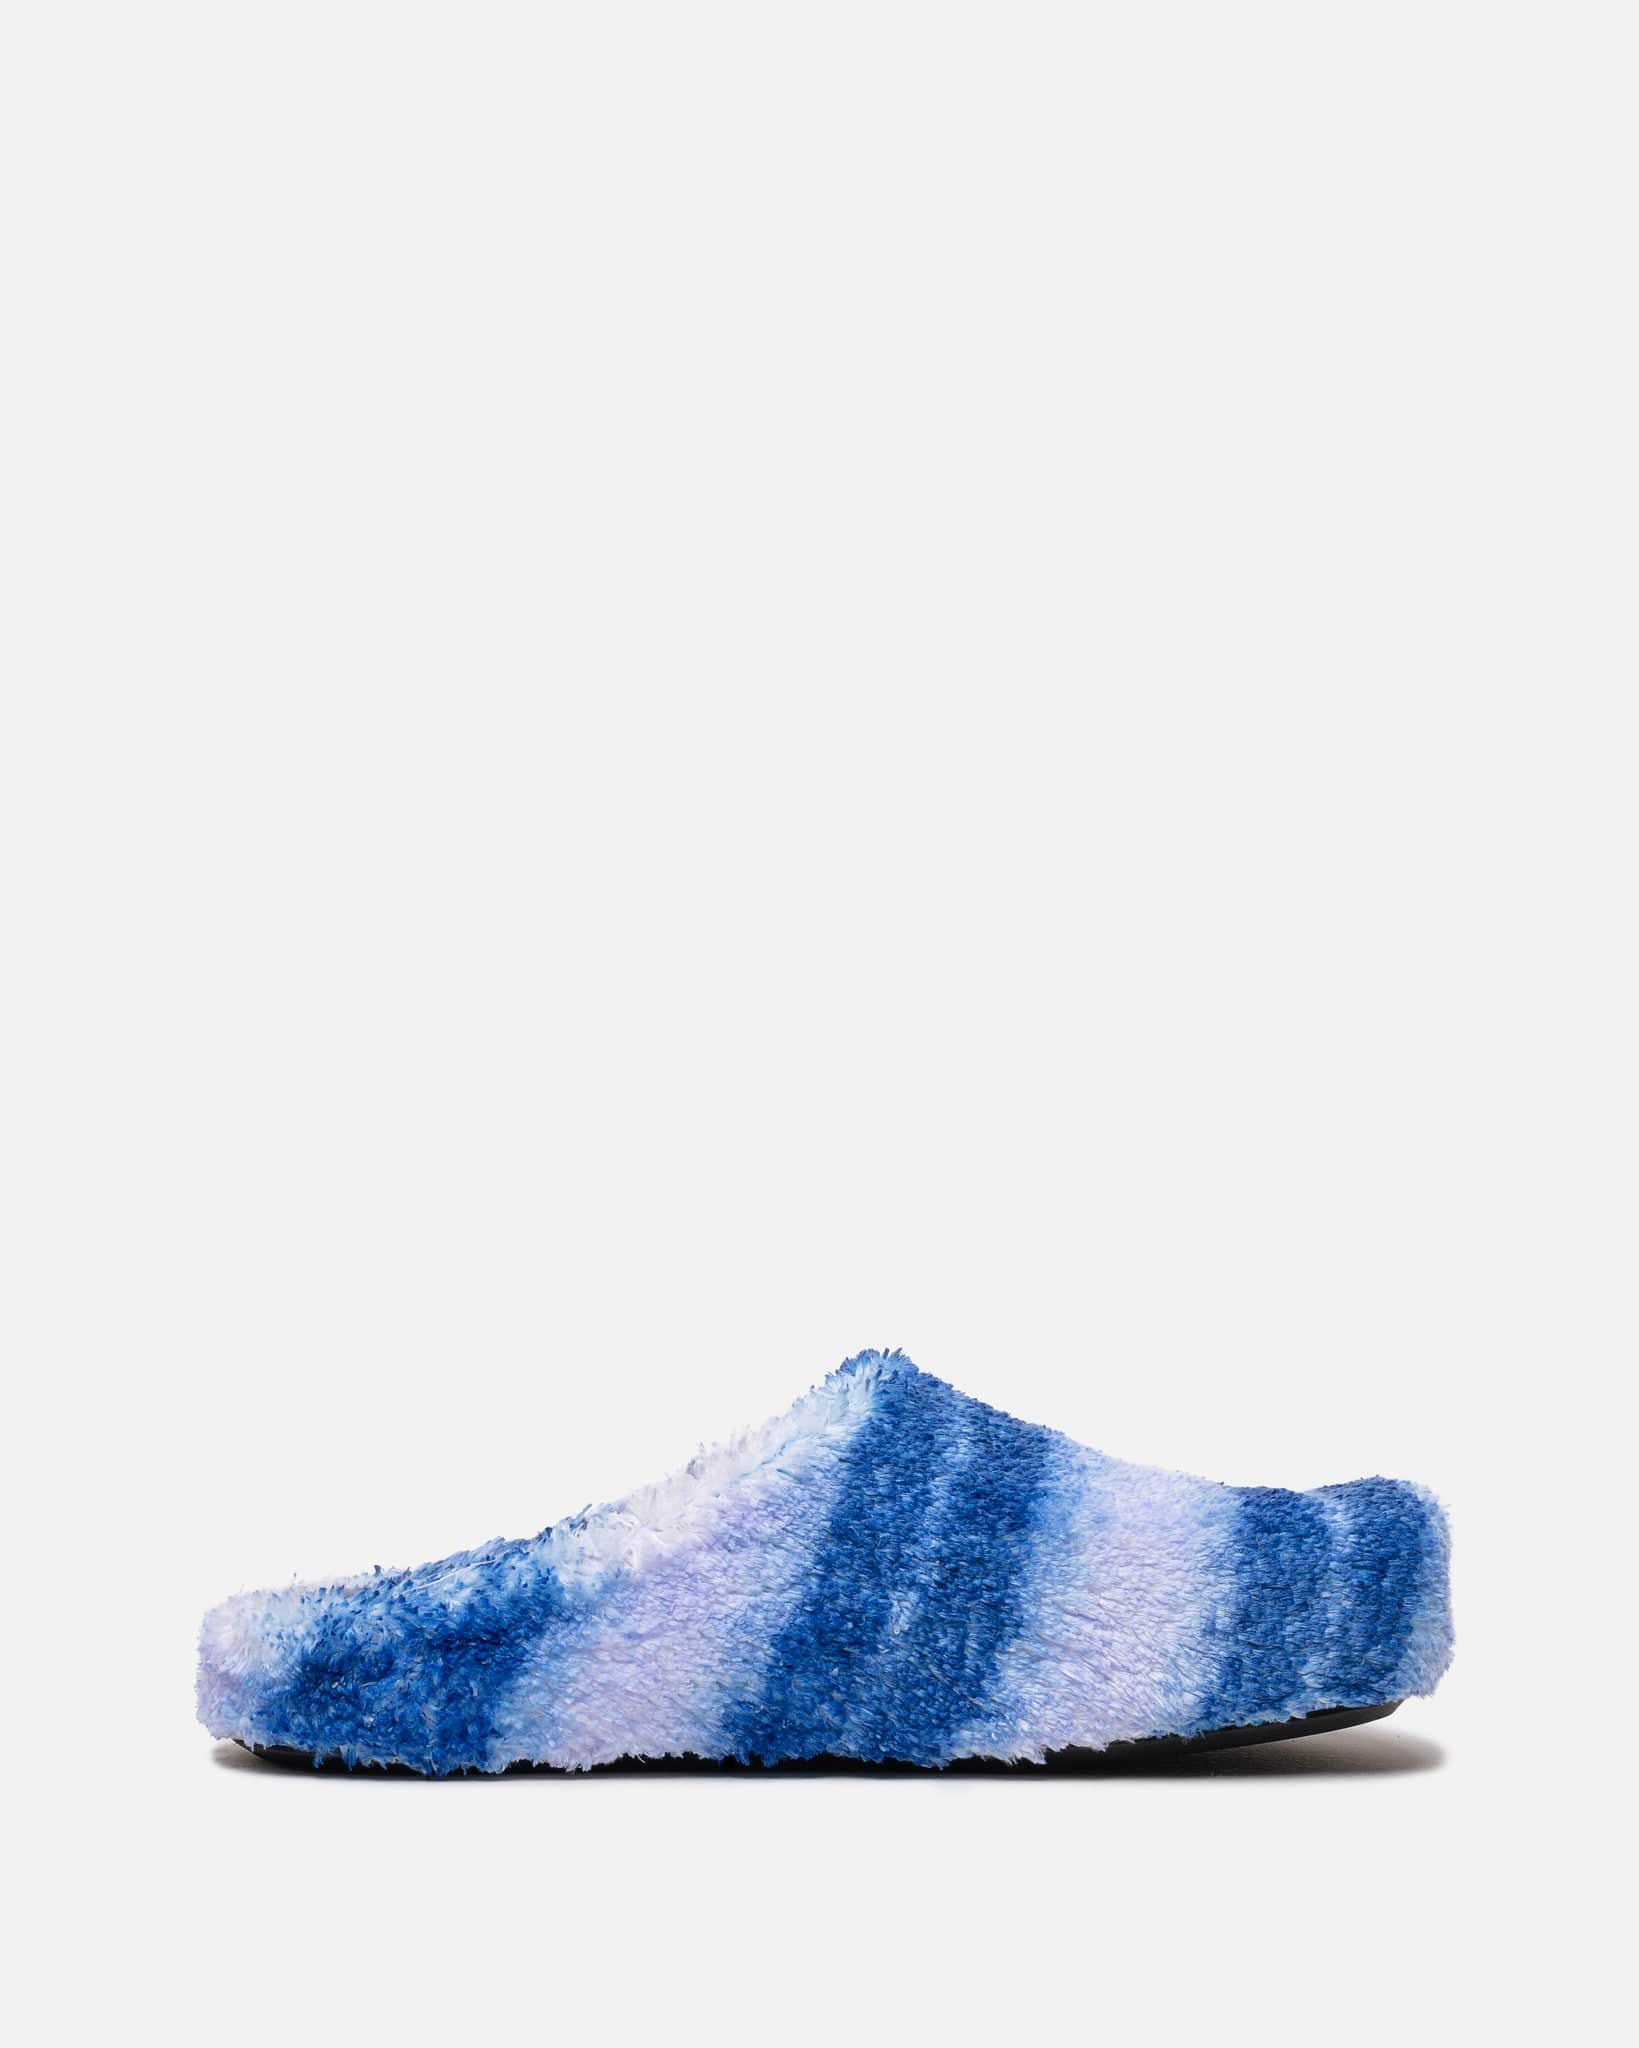 Marni Men's Shoes Abstract Sabot in Blue/White